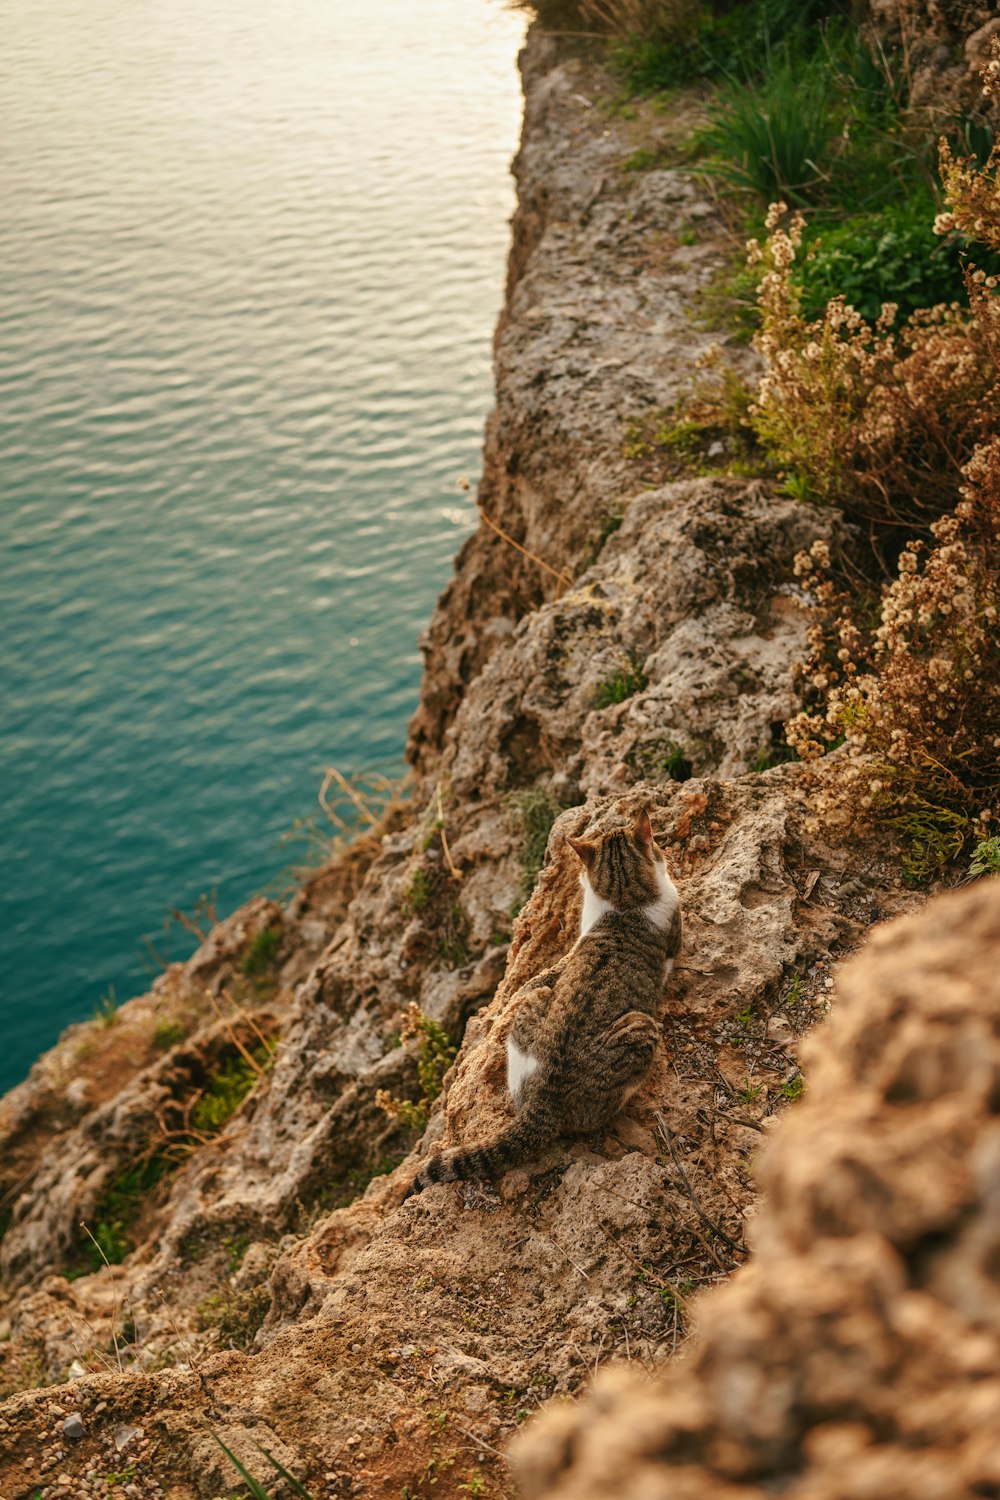 a cat sitting on the edge of a cliff next to a body of water